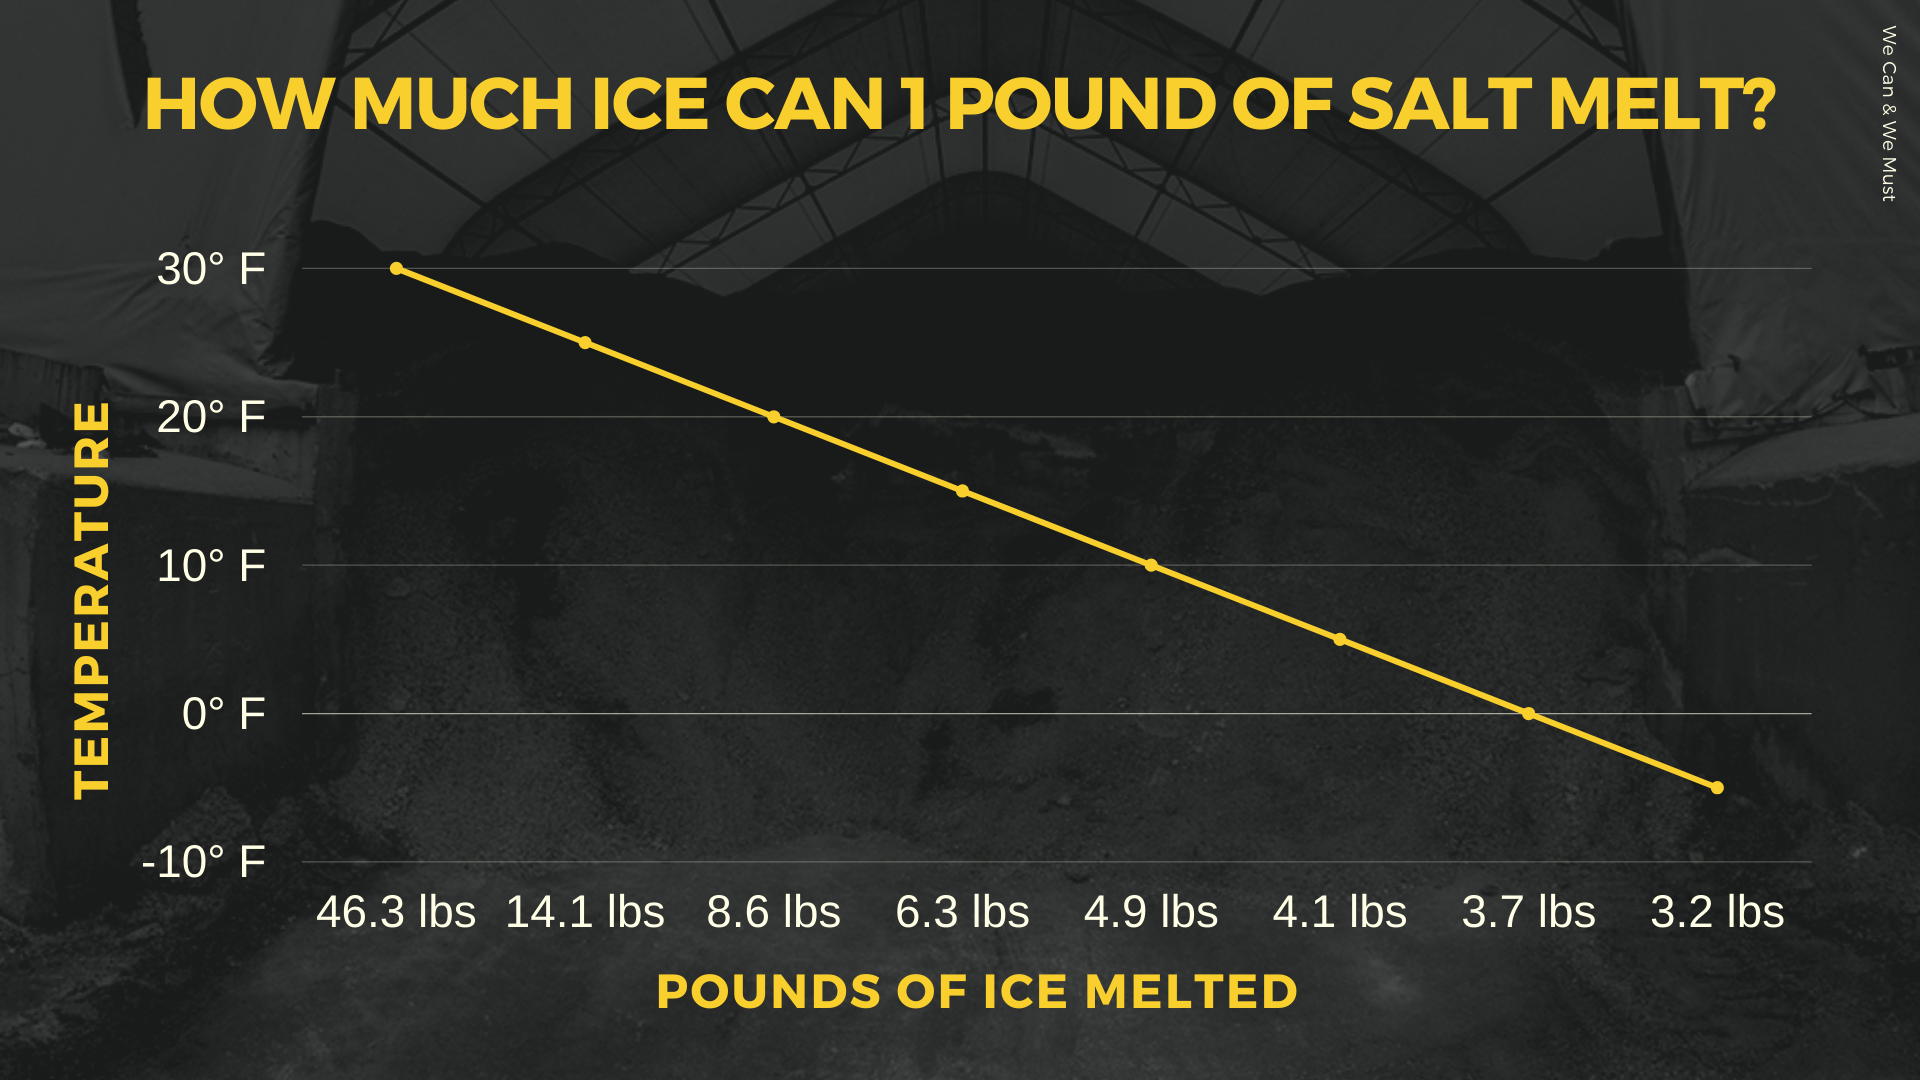 A chart displaying how much ice one pound of salt can melt based on temperature